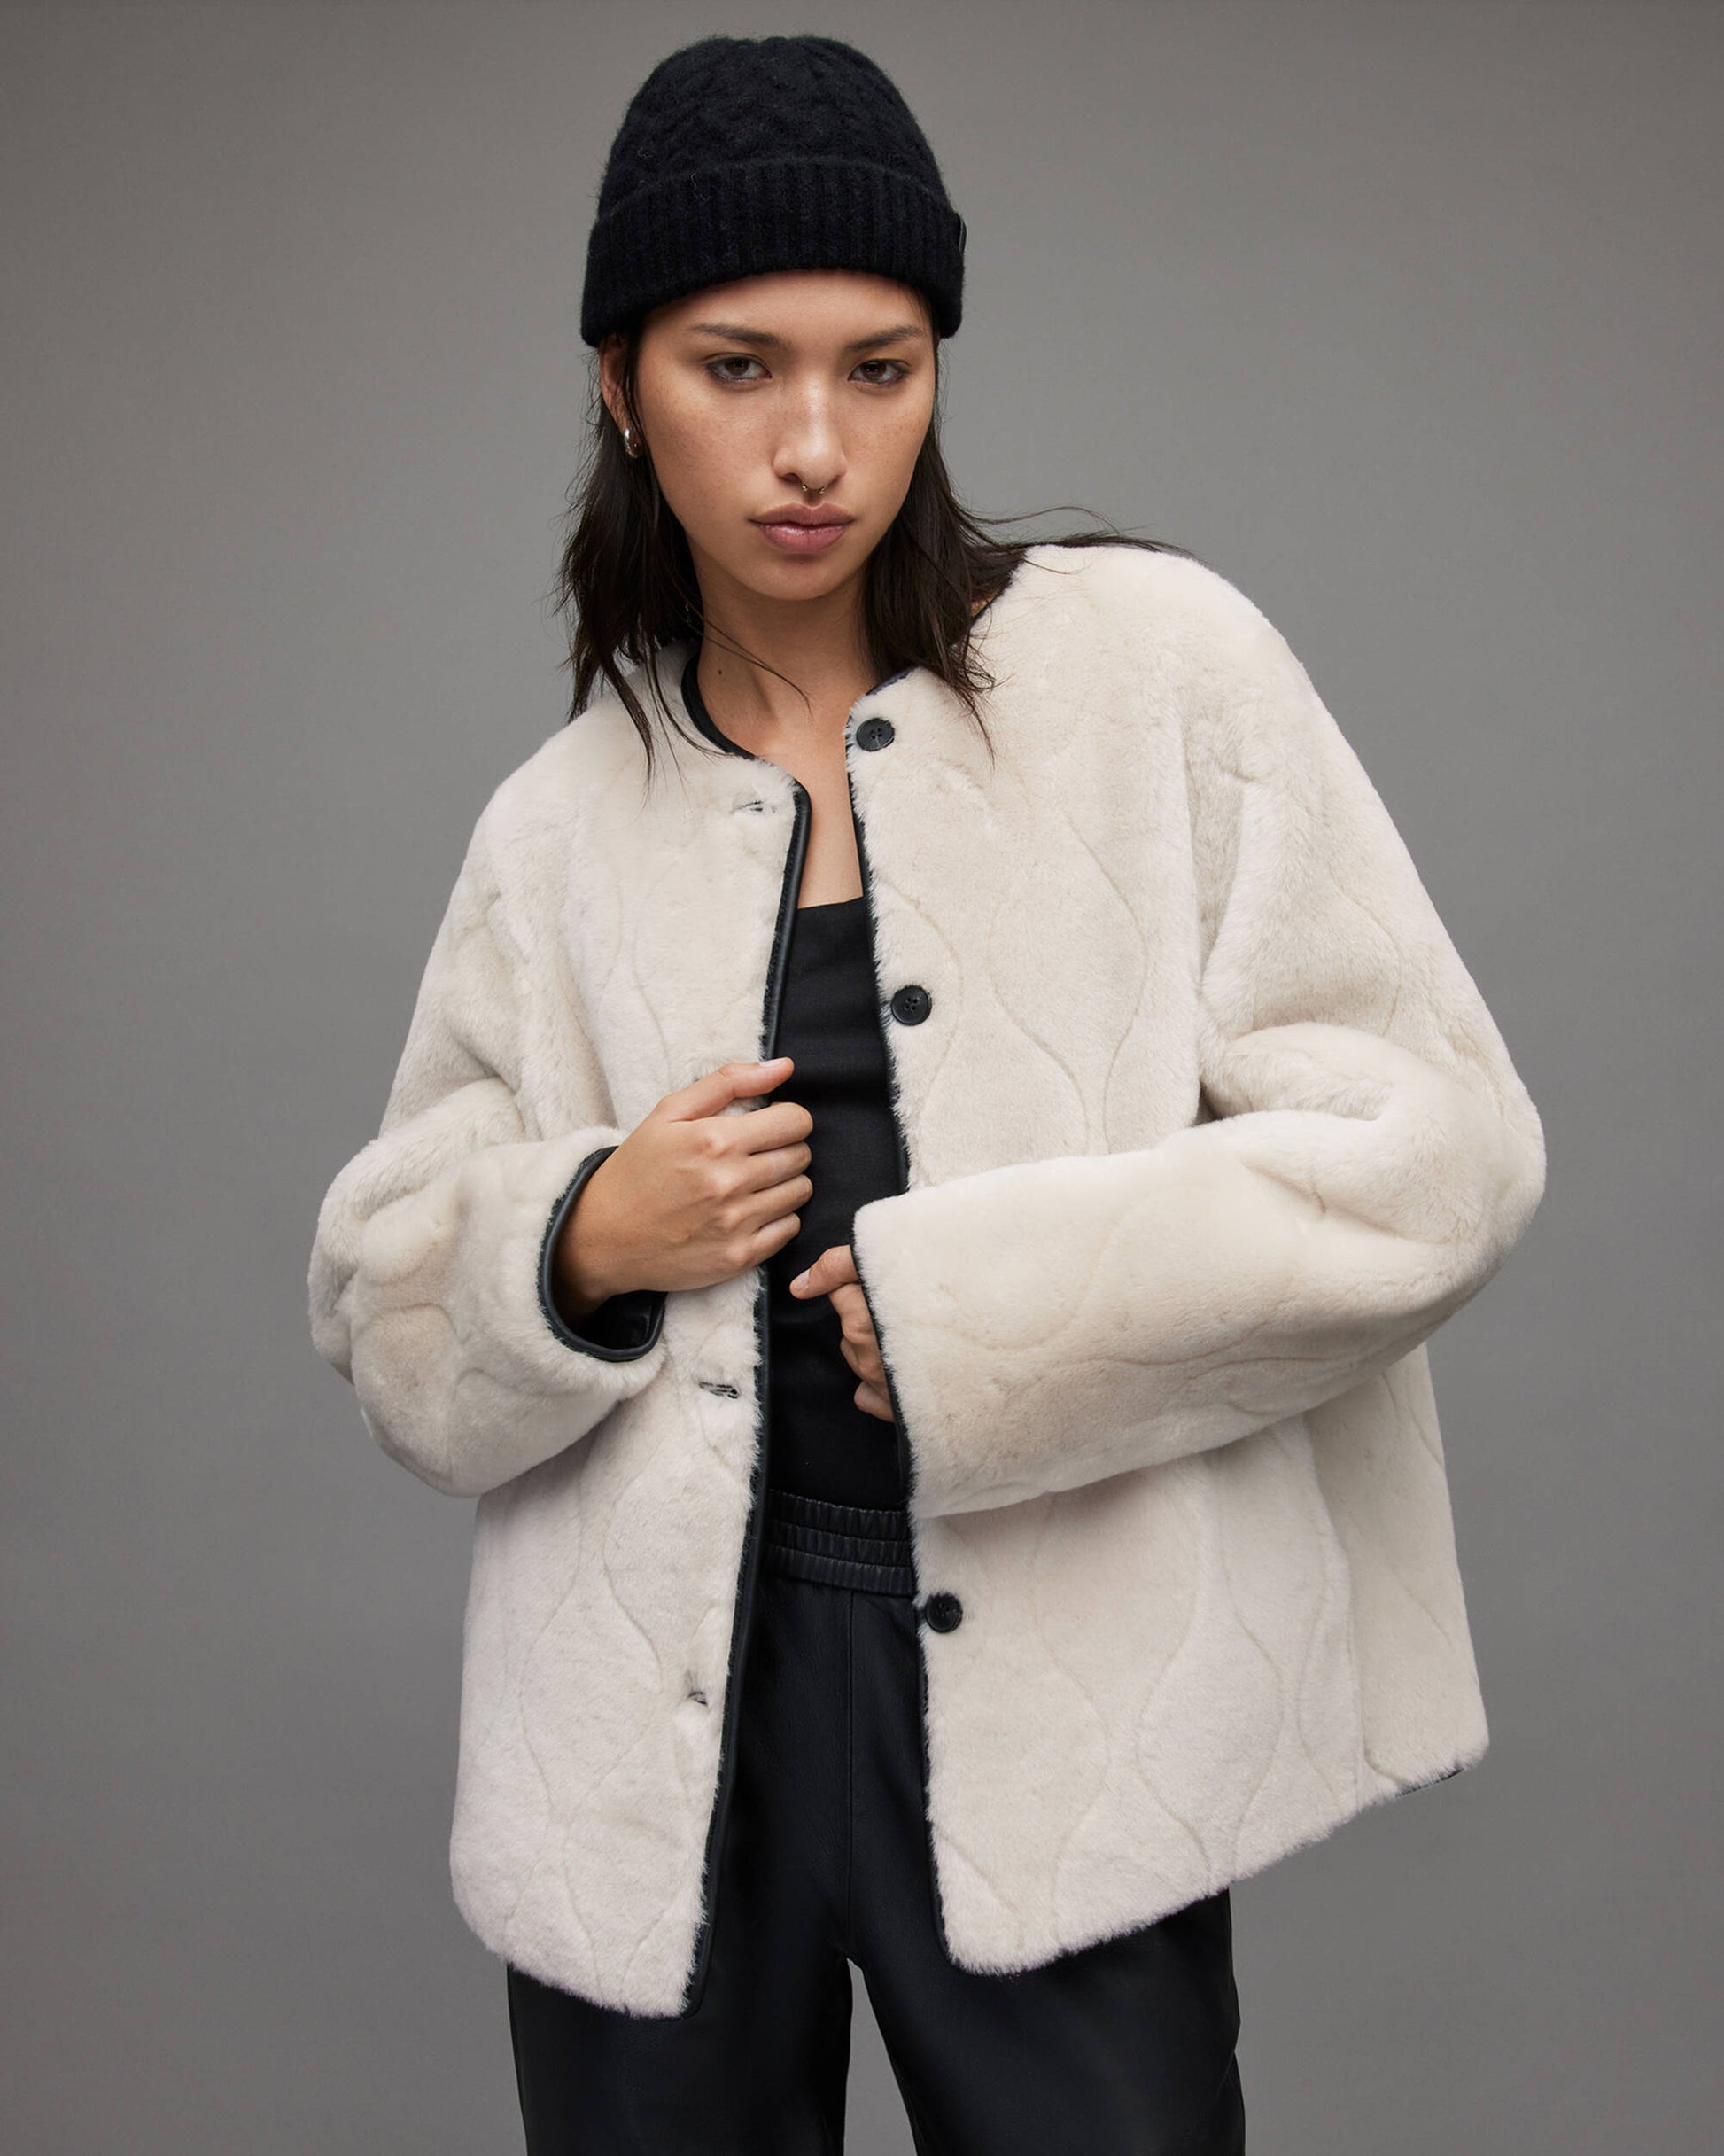 Women's Double Sided Black Leather & White Shearling Jacket